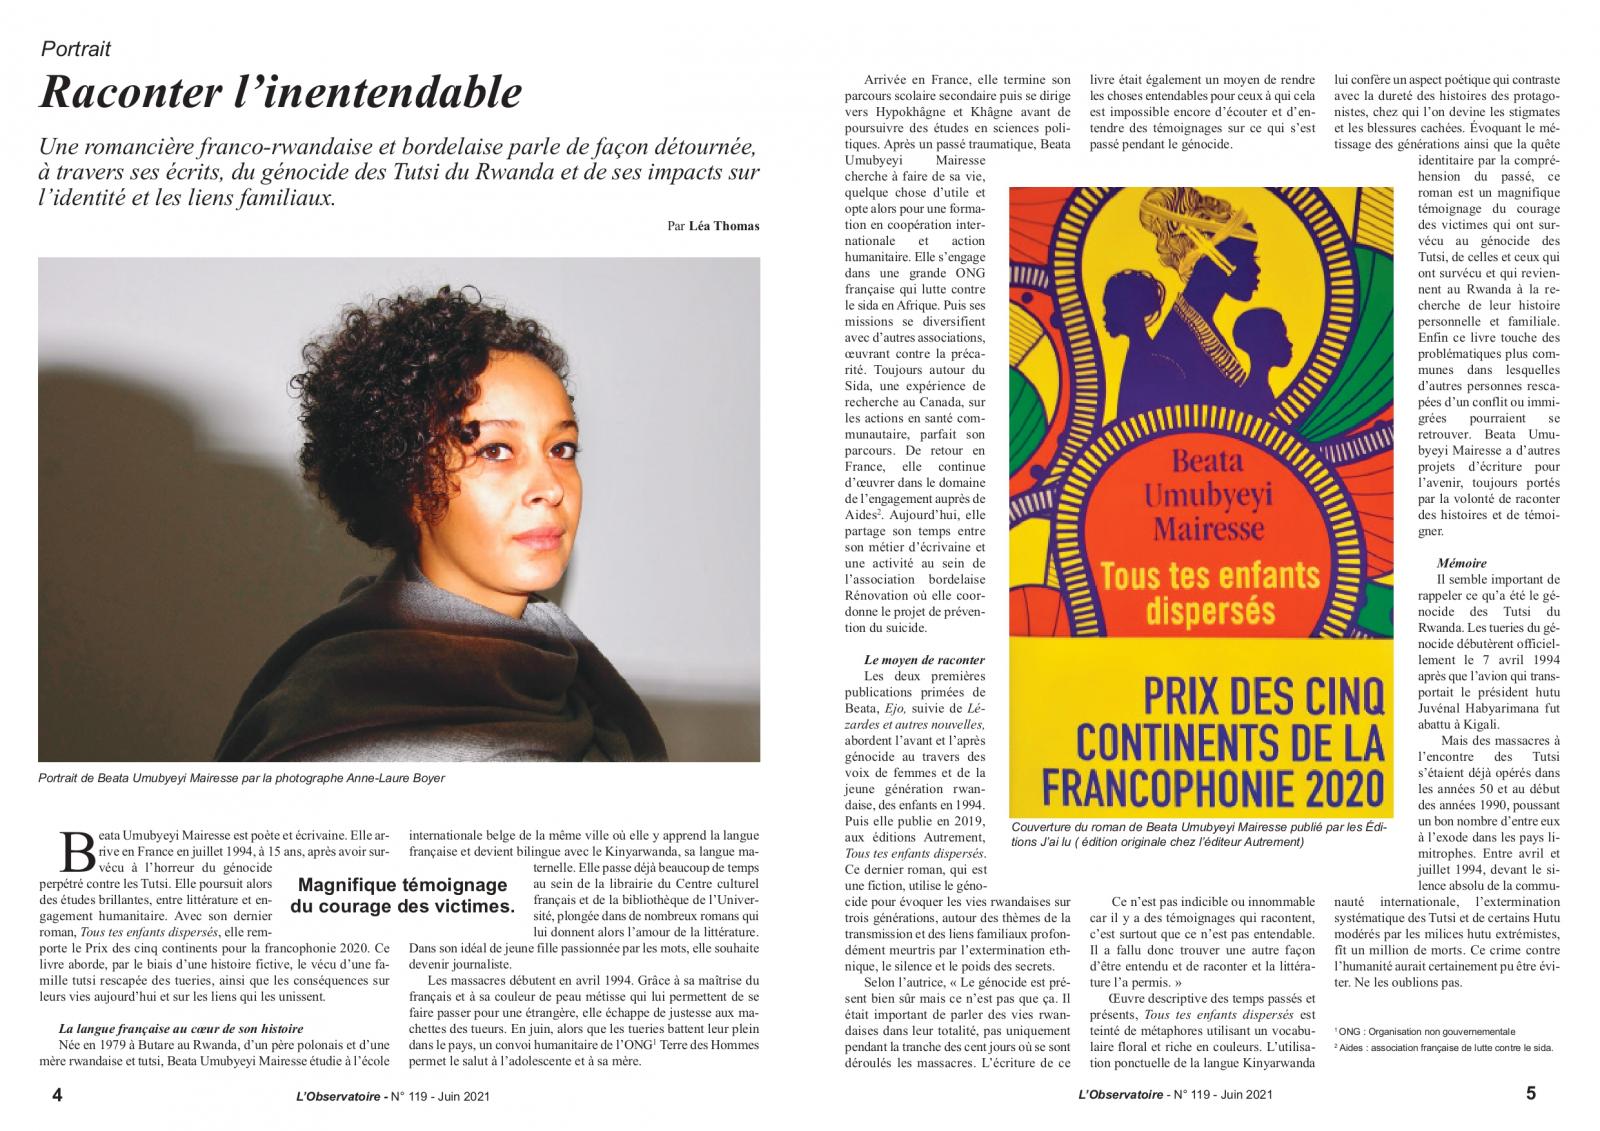 Image from Ecriture journalistique